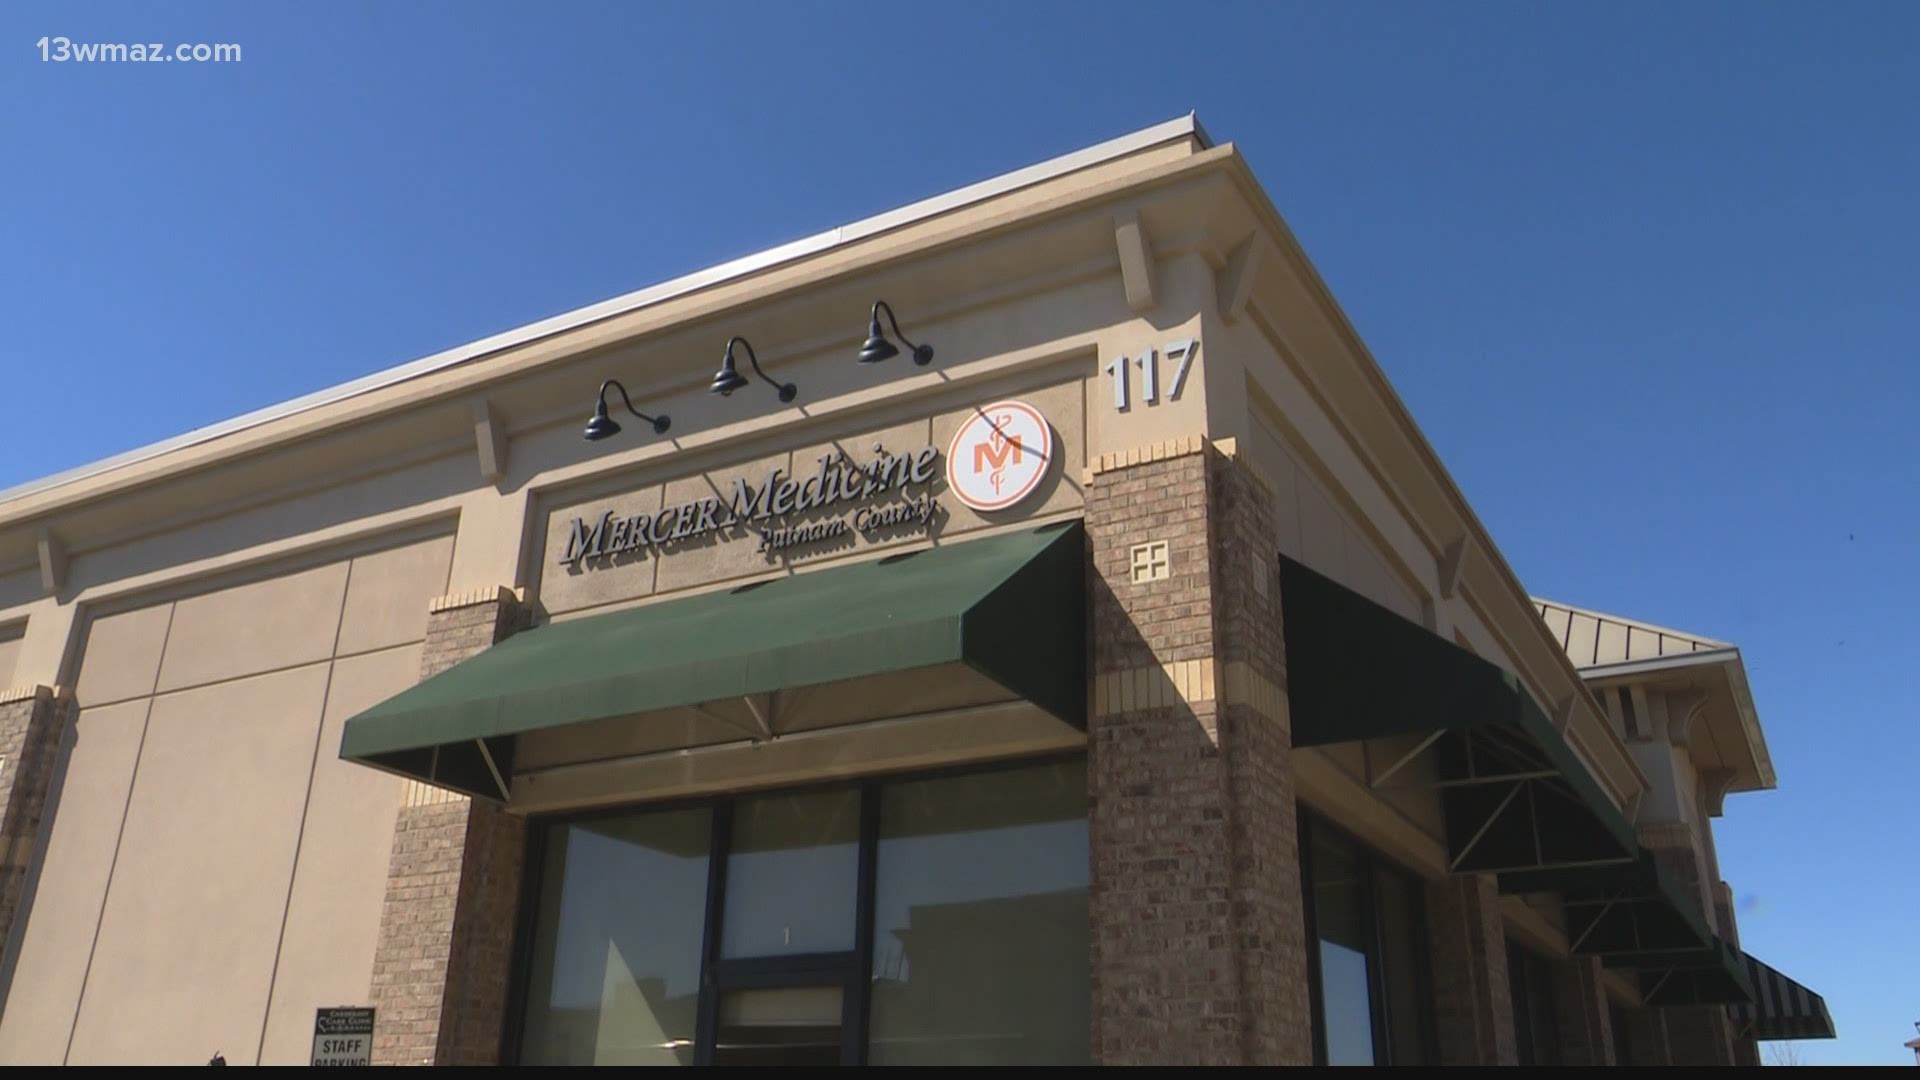 Mercer Medicine will host a ribbon-cutting ceremony Friday to celebrate the clinic's grand opening.